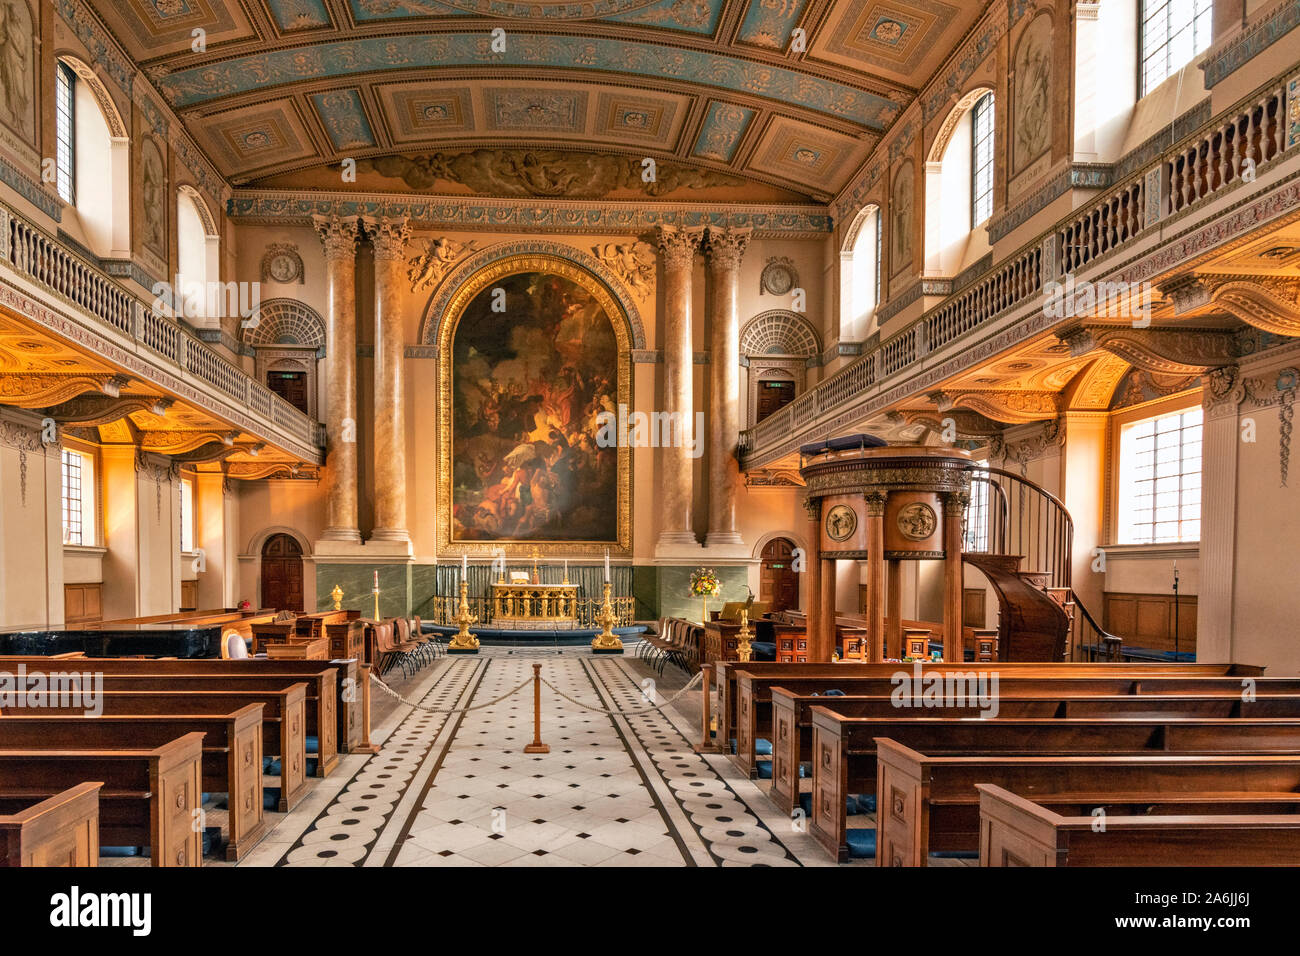 LONDON OLD ROYAL NAVAL COLLEGE GREENWICH INTERIOR CHAPEL OF ST PETER AND ST PAUL Stock Photo